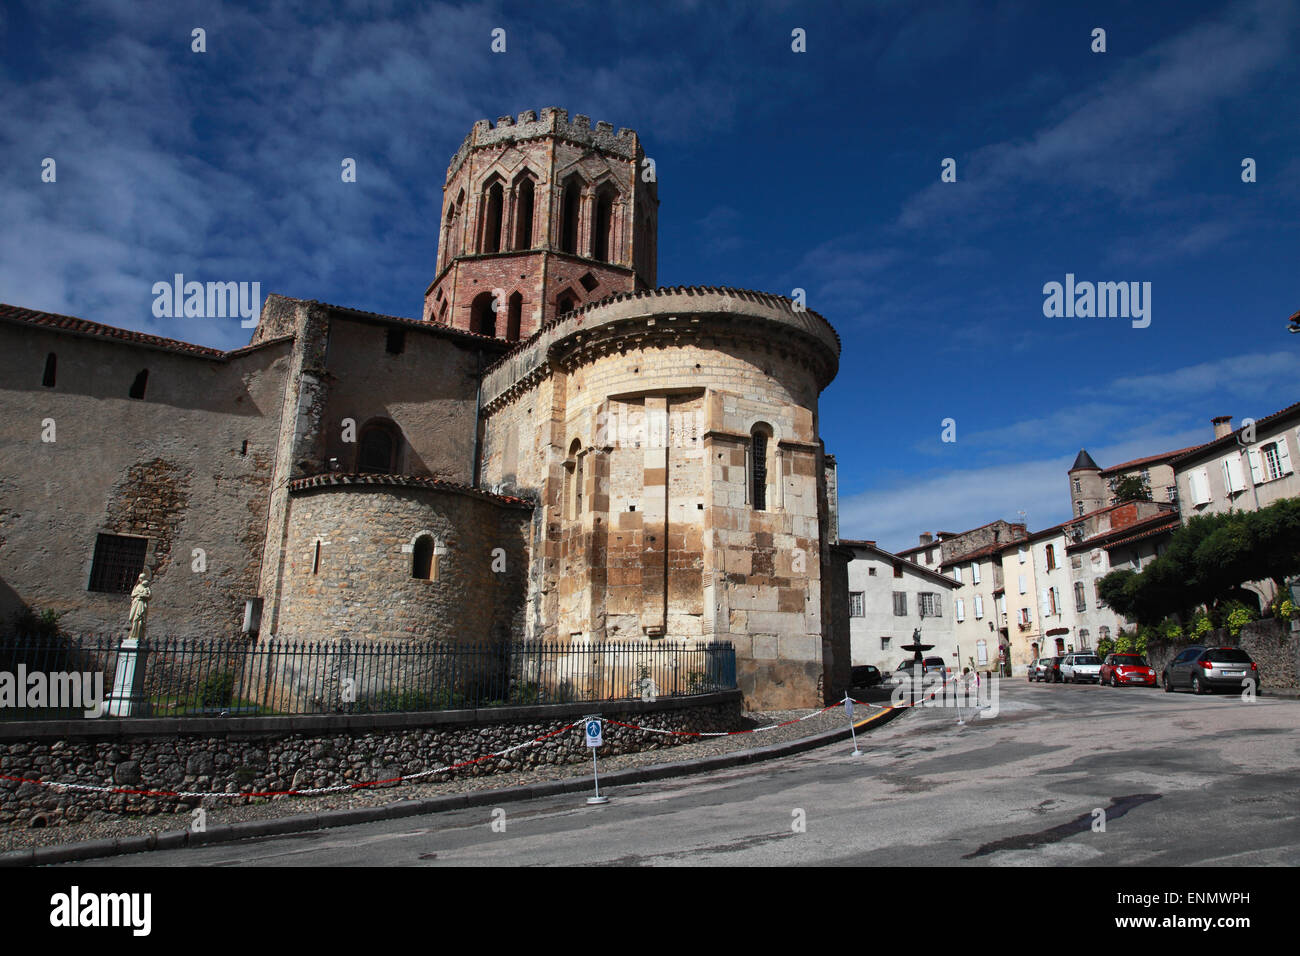 The Romanesque Cathedral of Saint-Lizier in the small town of Saint-Lizier in Ariege, south west France Stock Photo